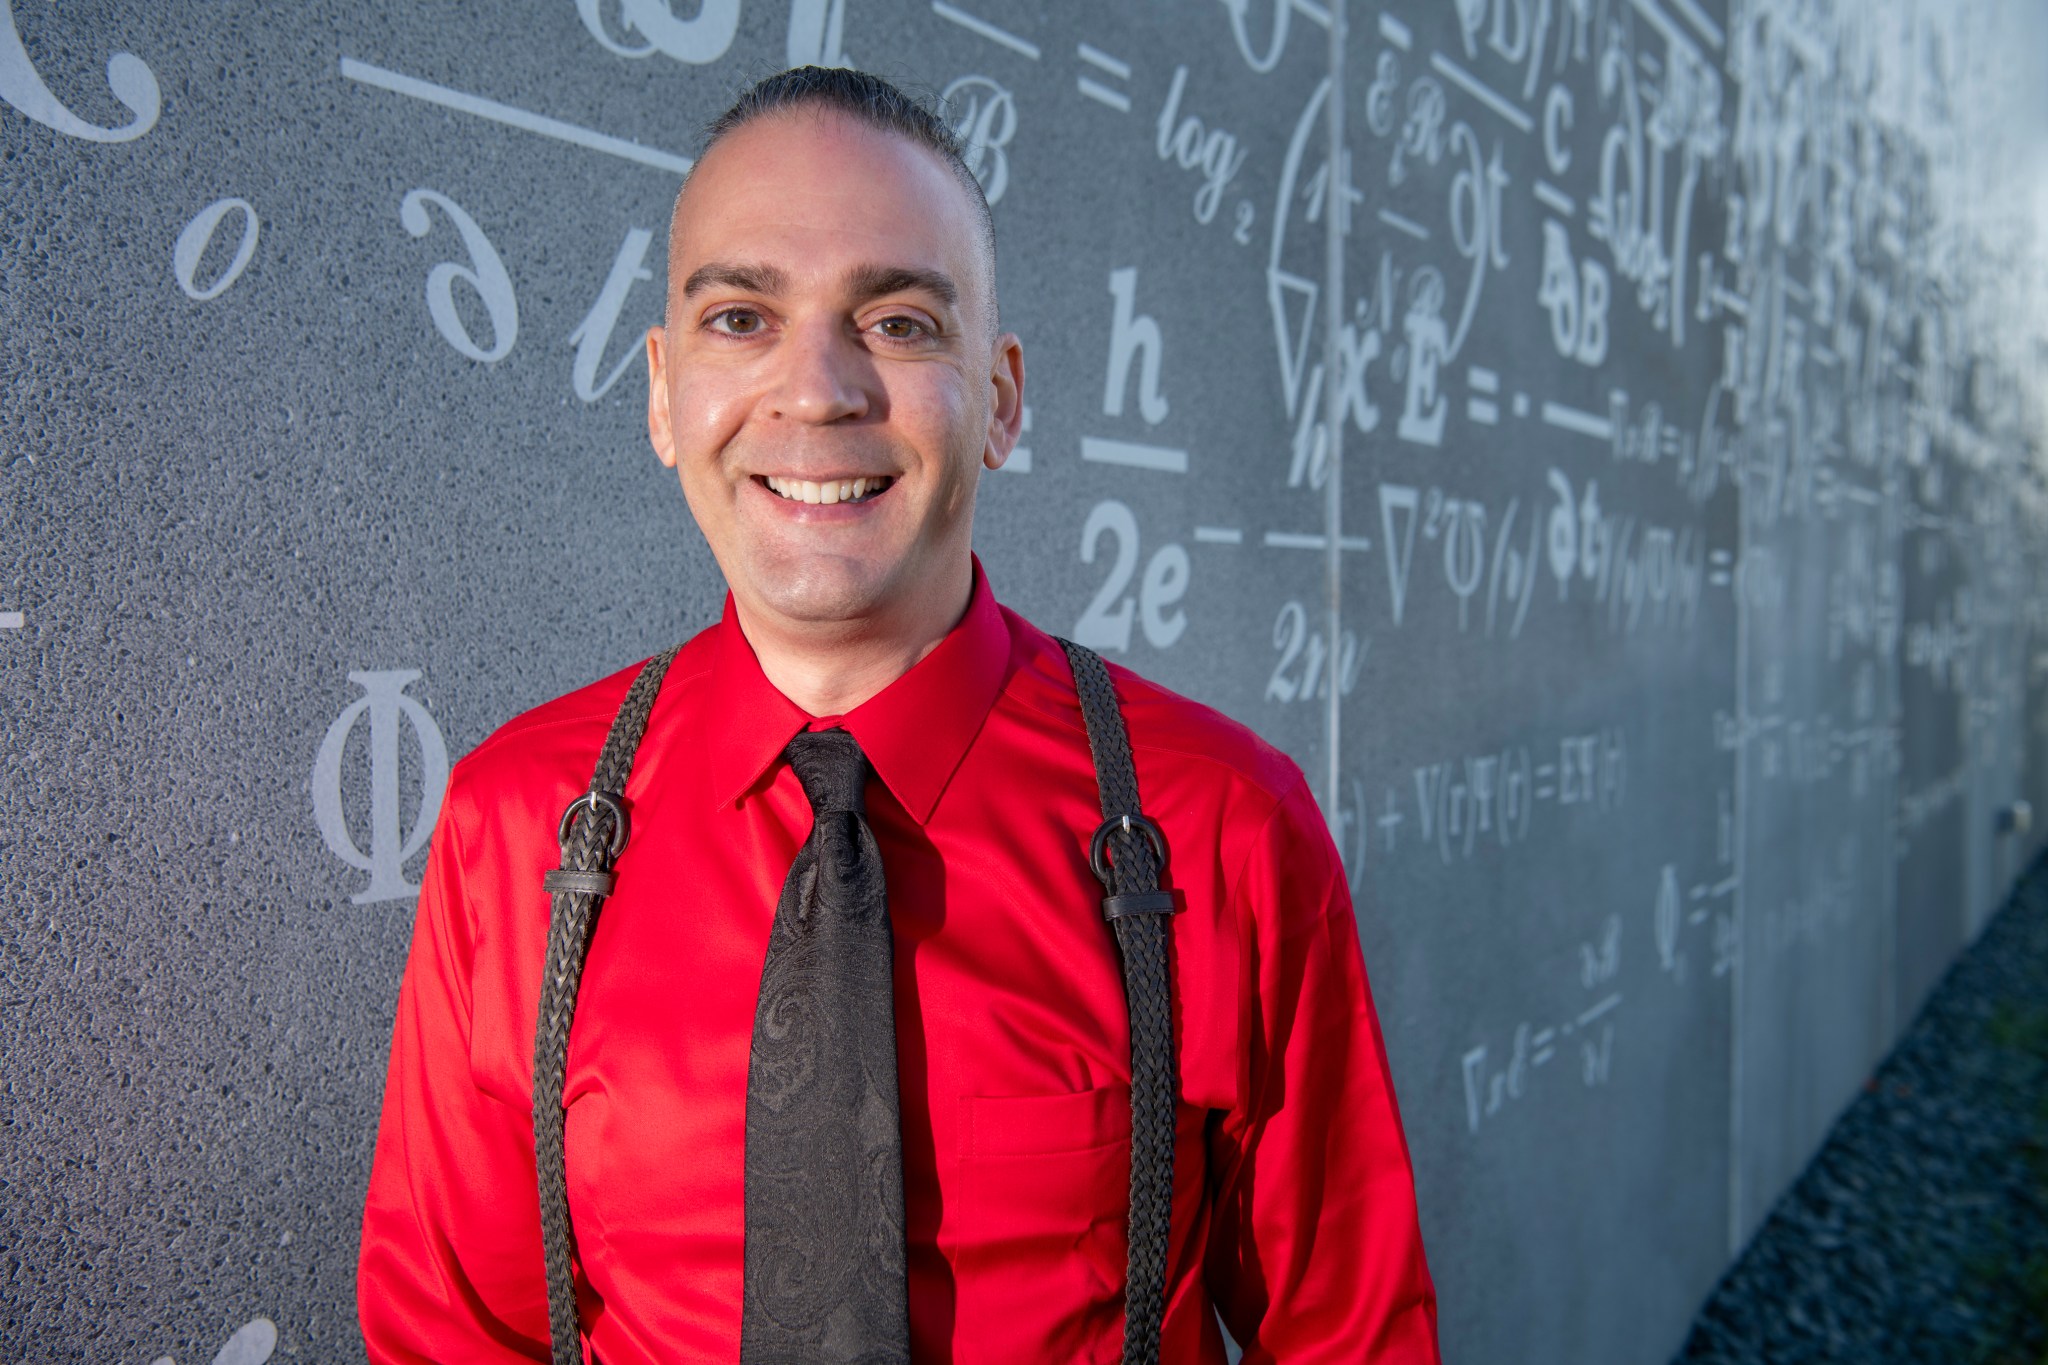 Man smiling in front of blackboard with calculations.